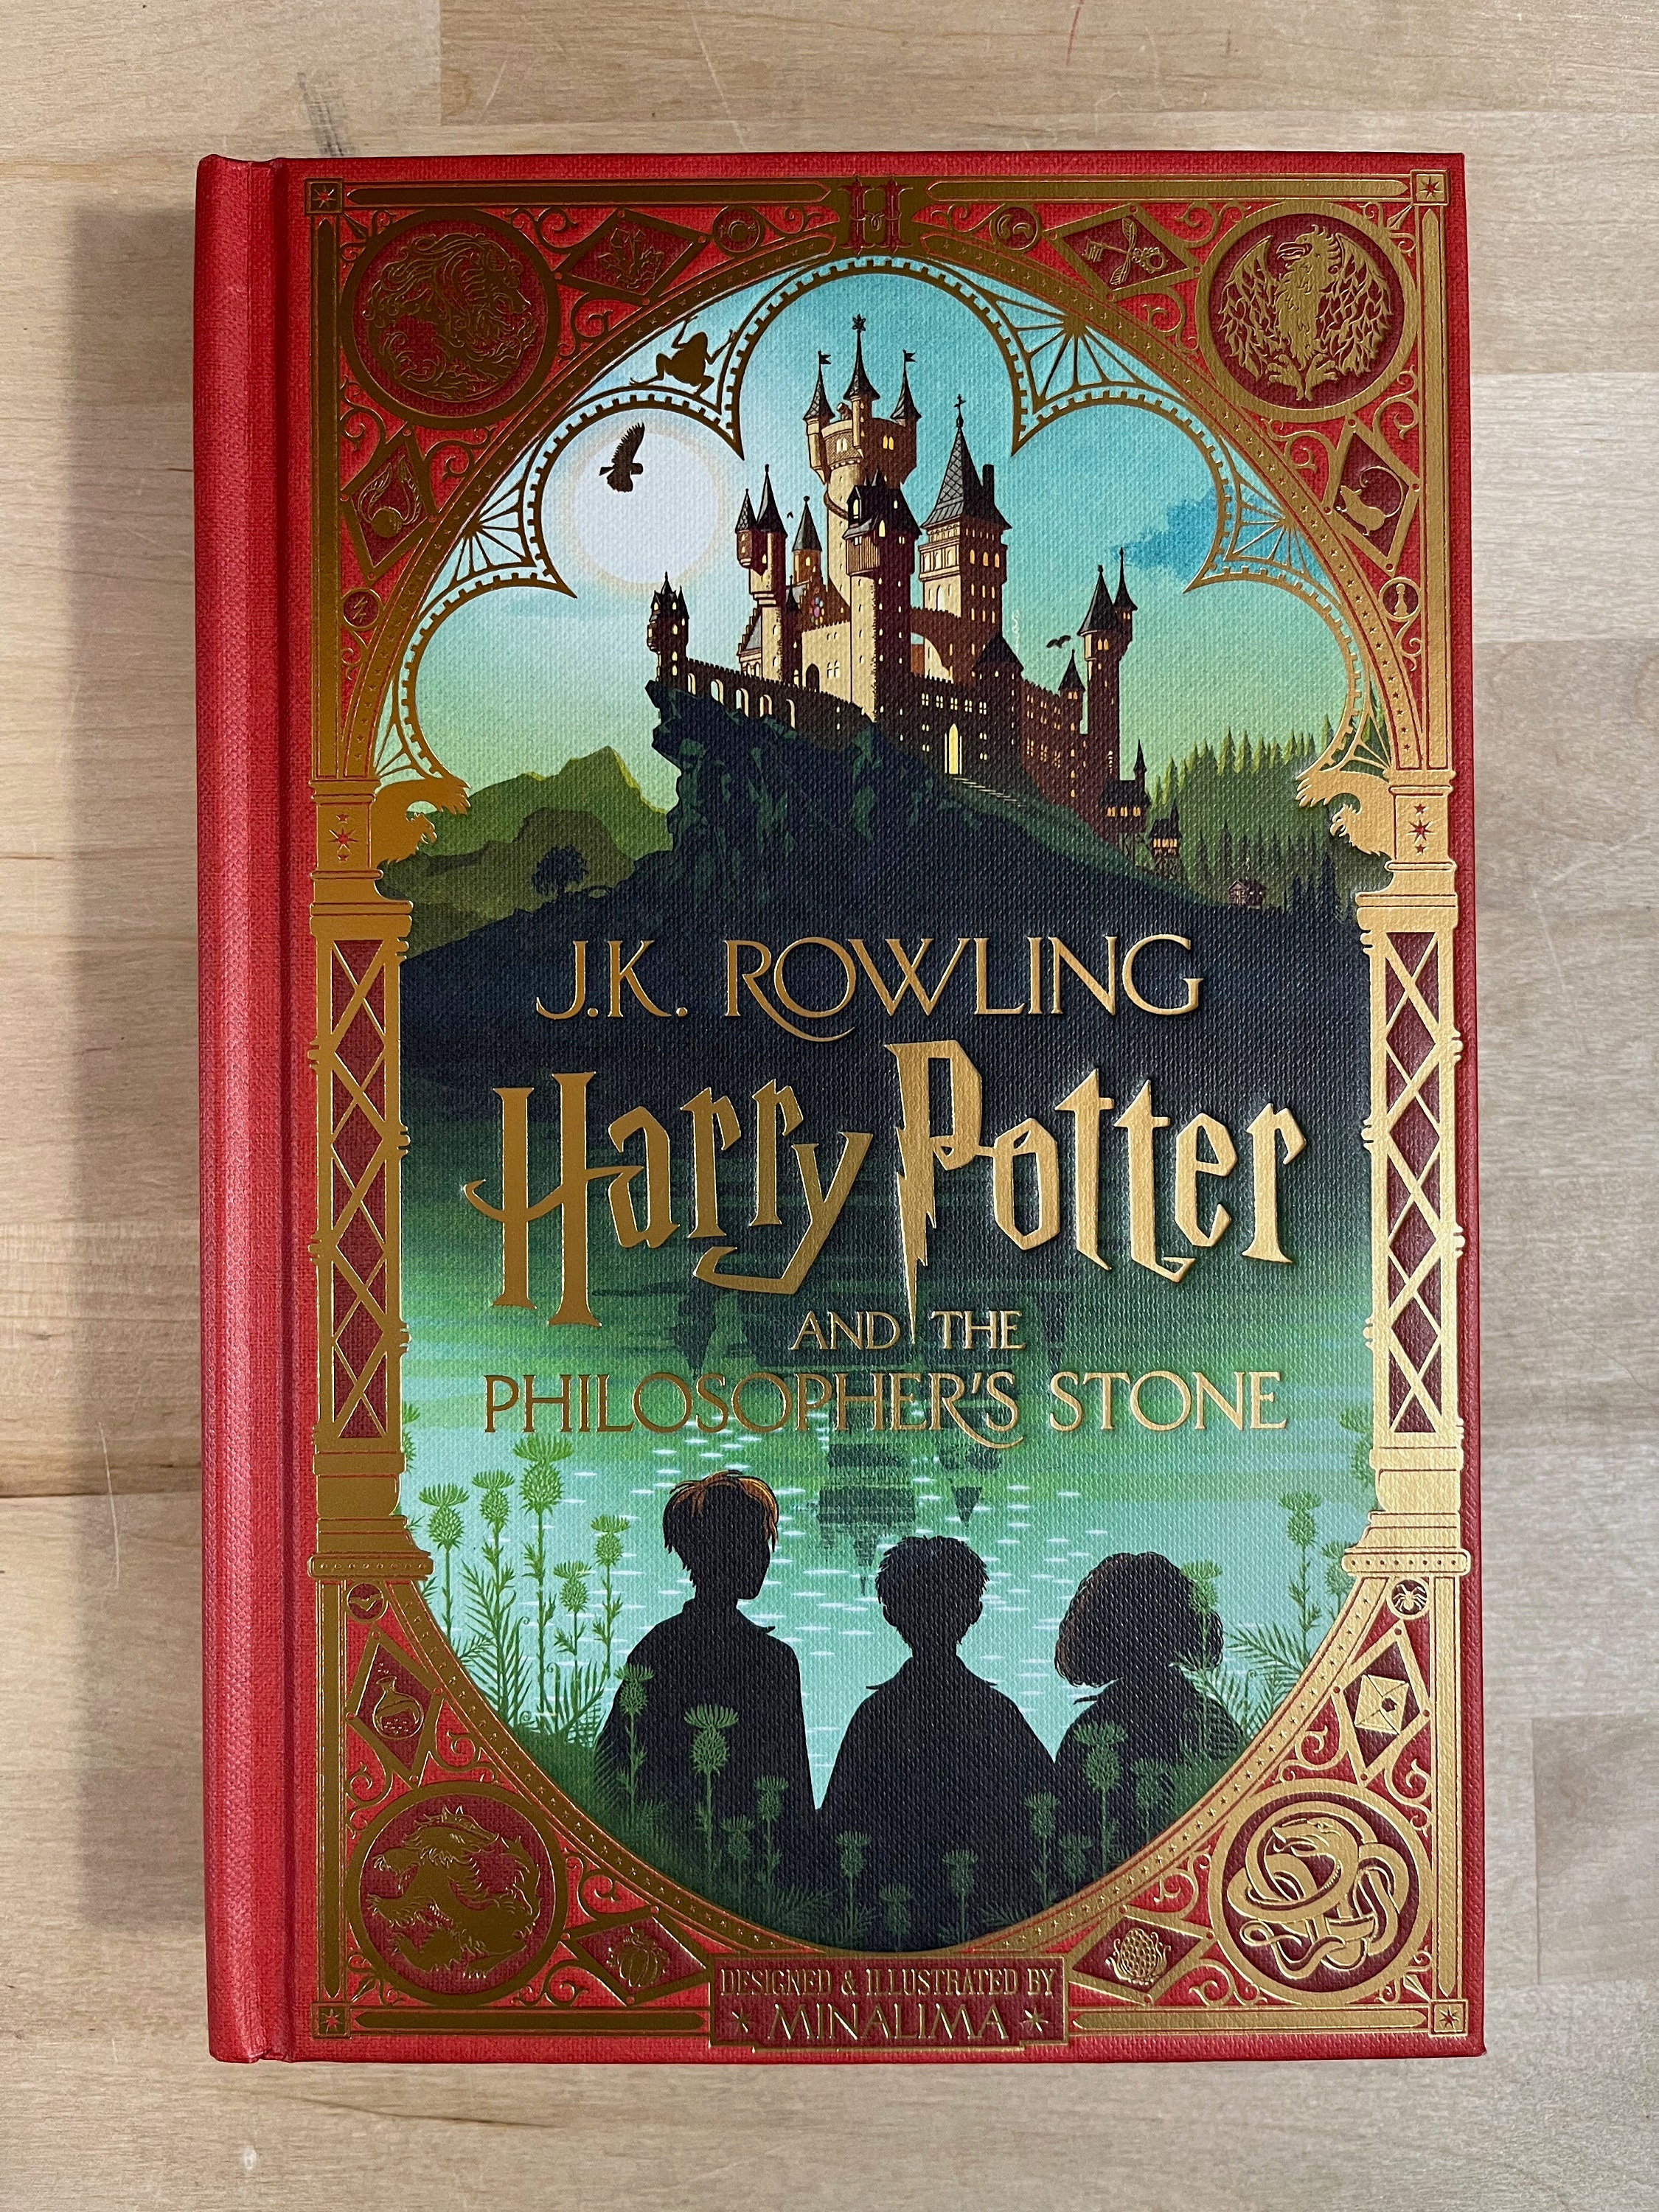 Harry Potter and the Sorcerer's Stone (MinaLima Edition) by J. K. Rowling